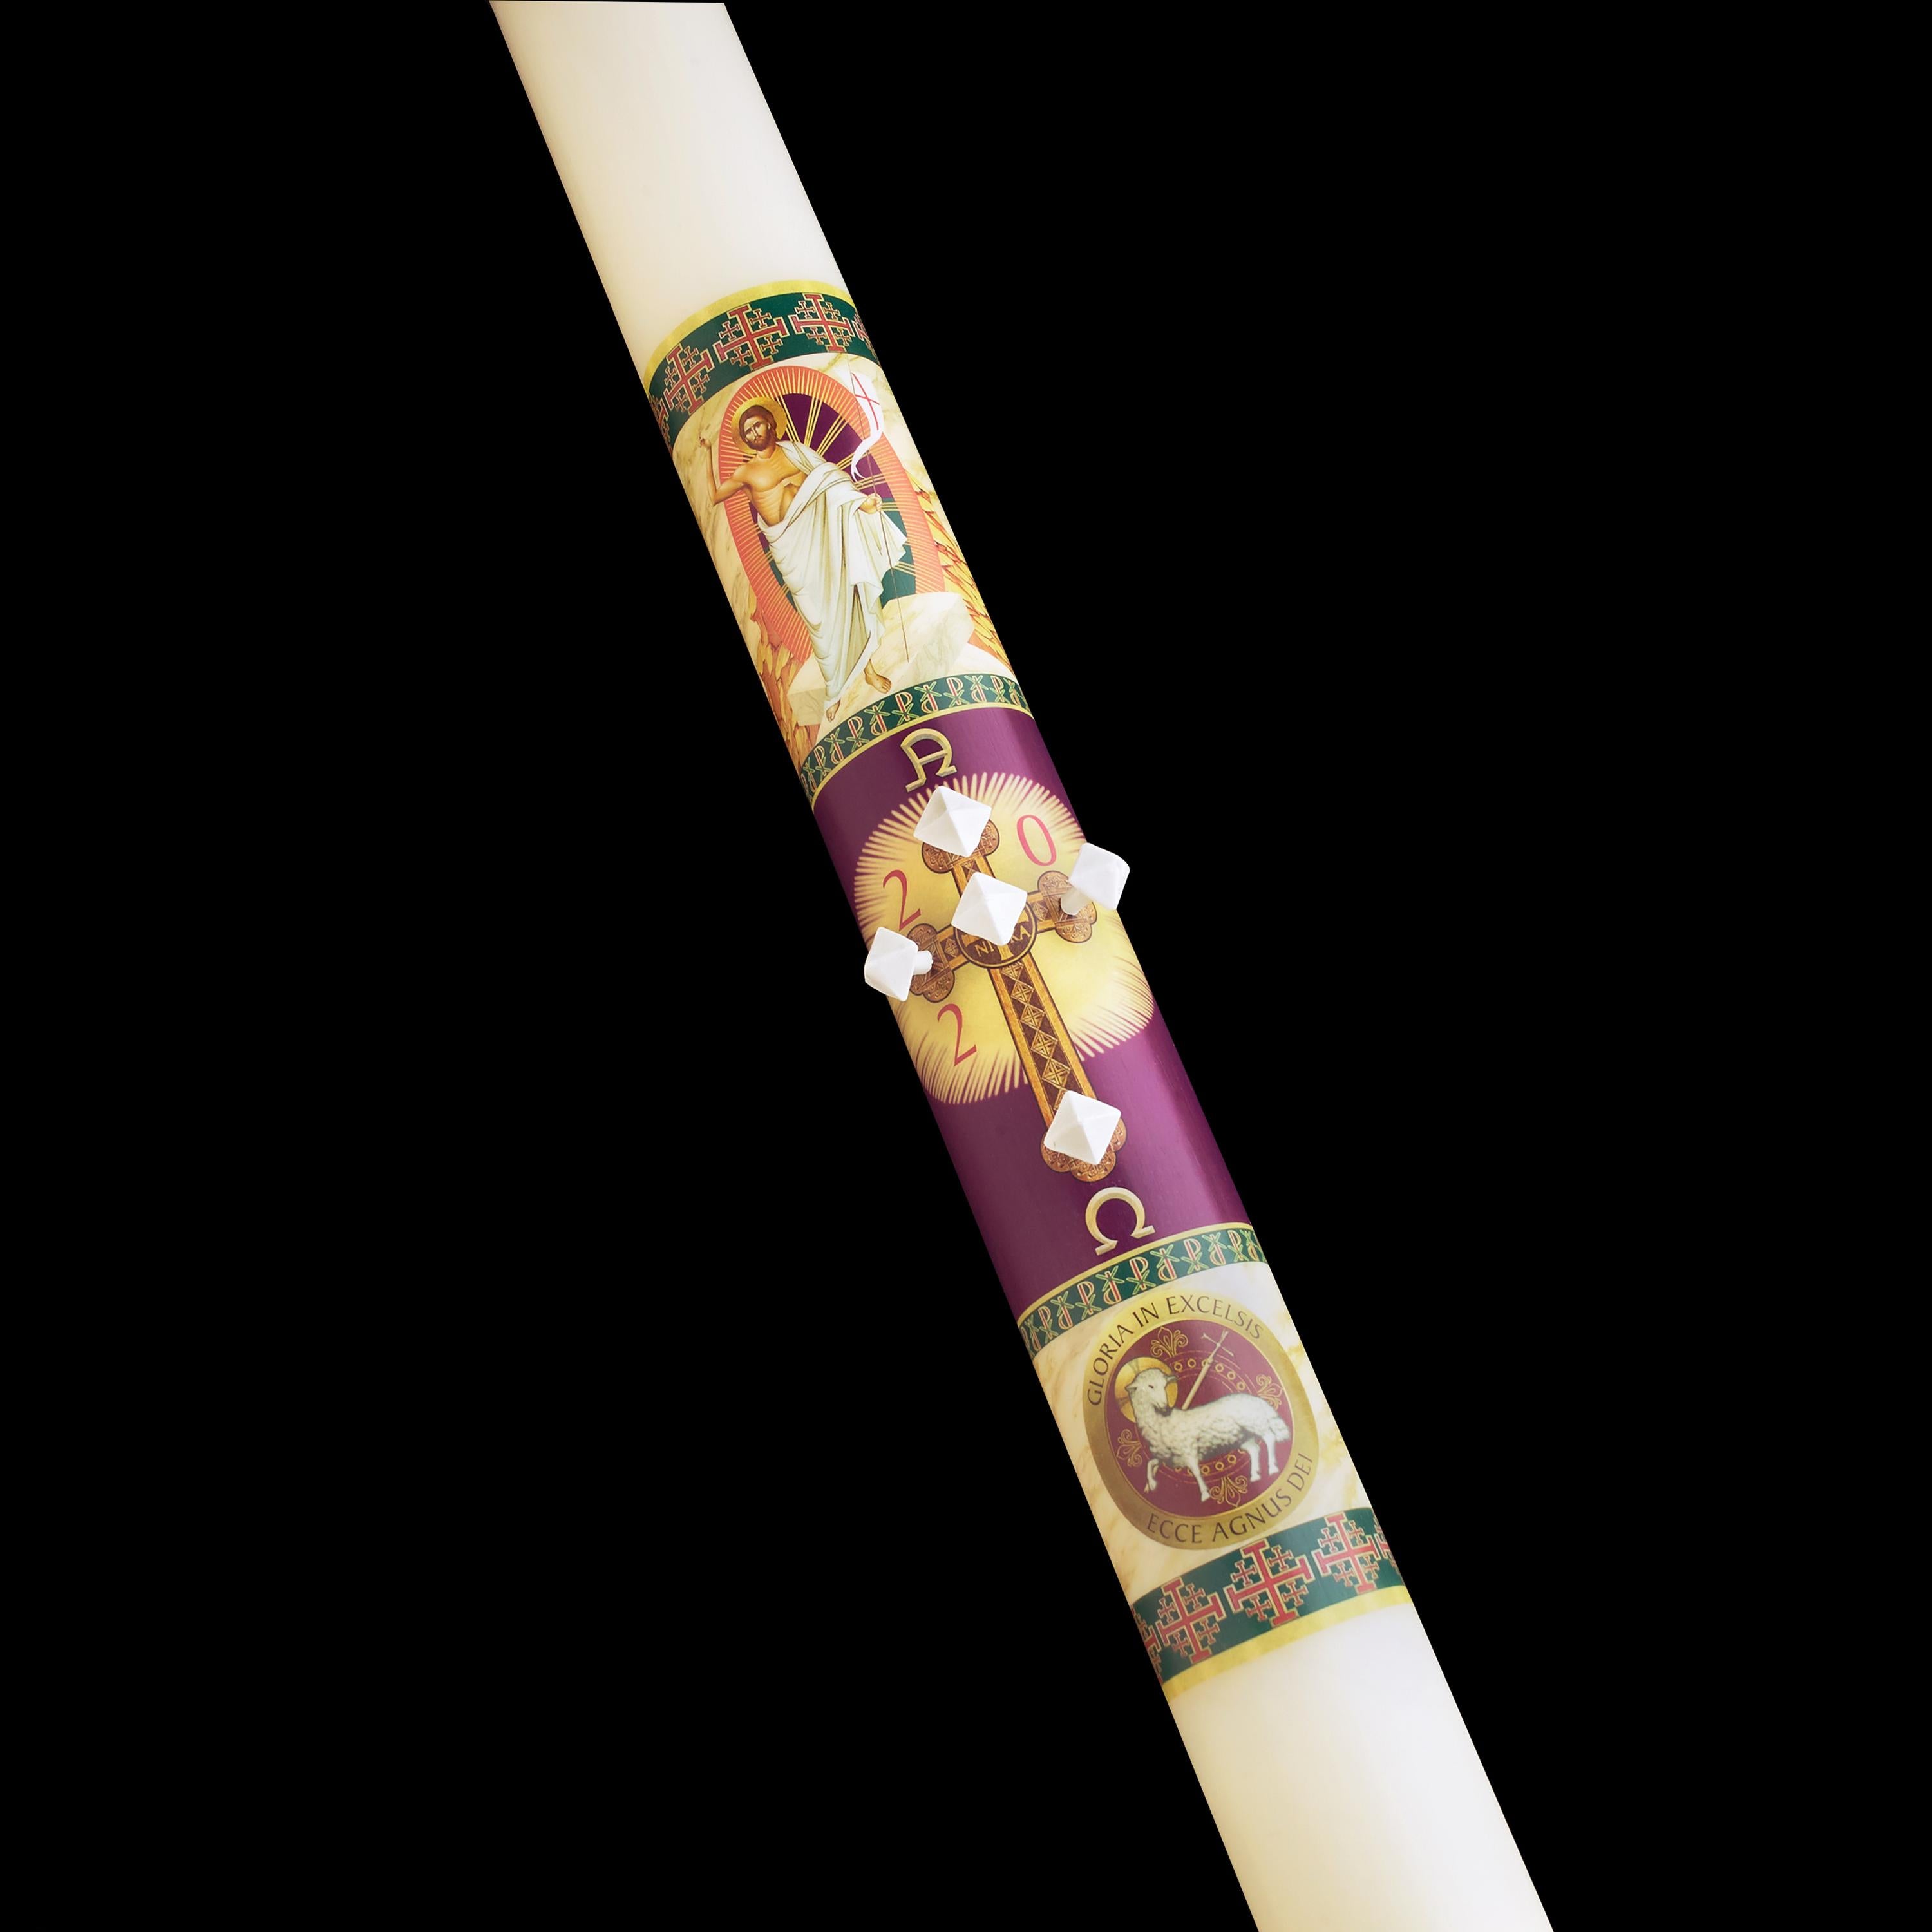 prince-of-peace-paschal-candle.jpg